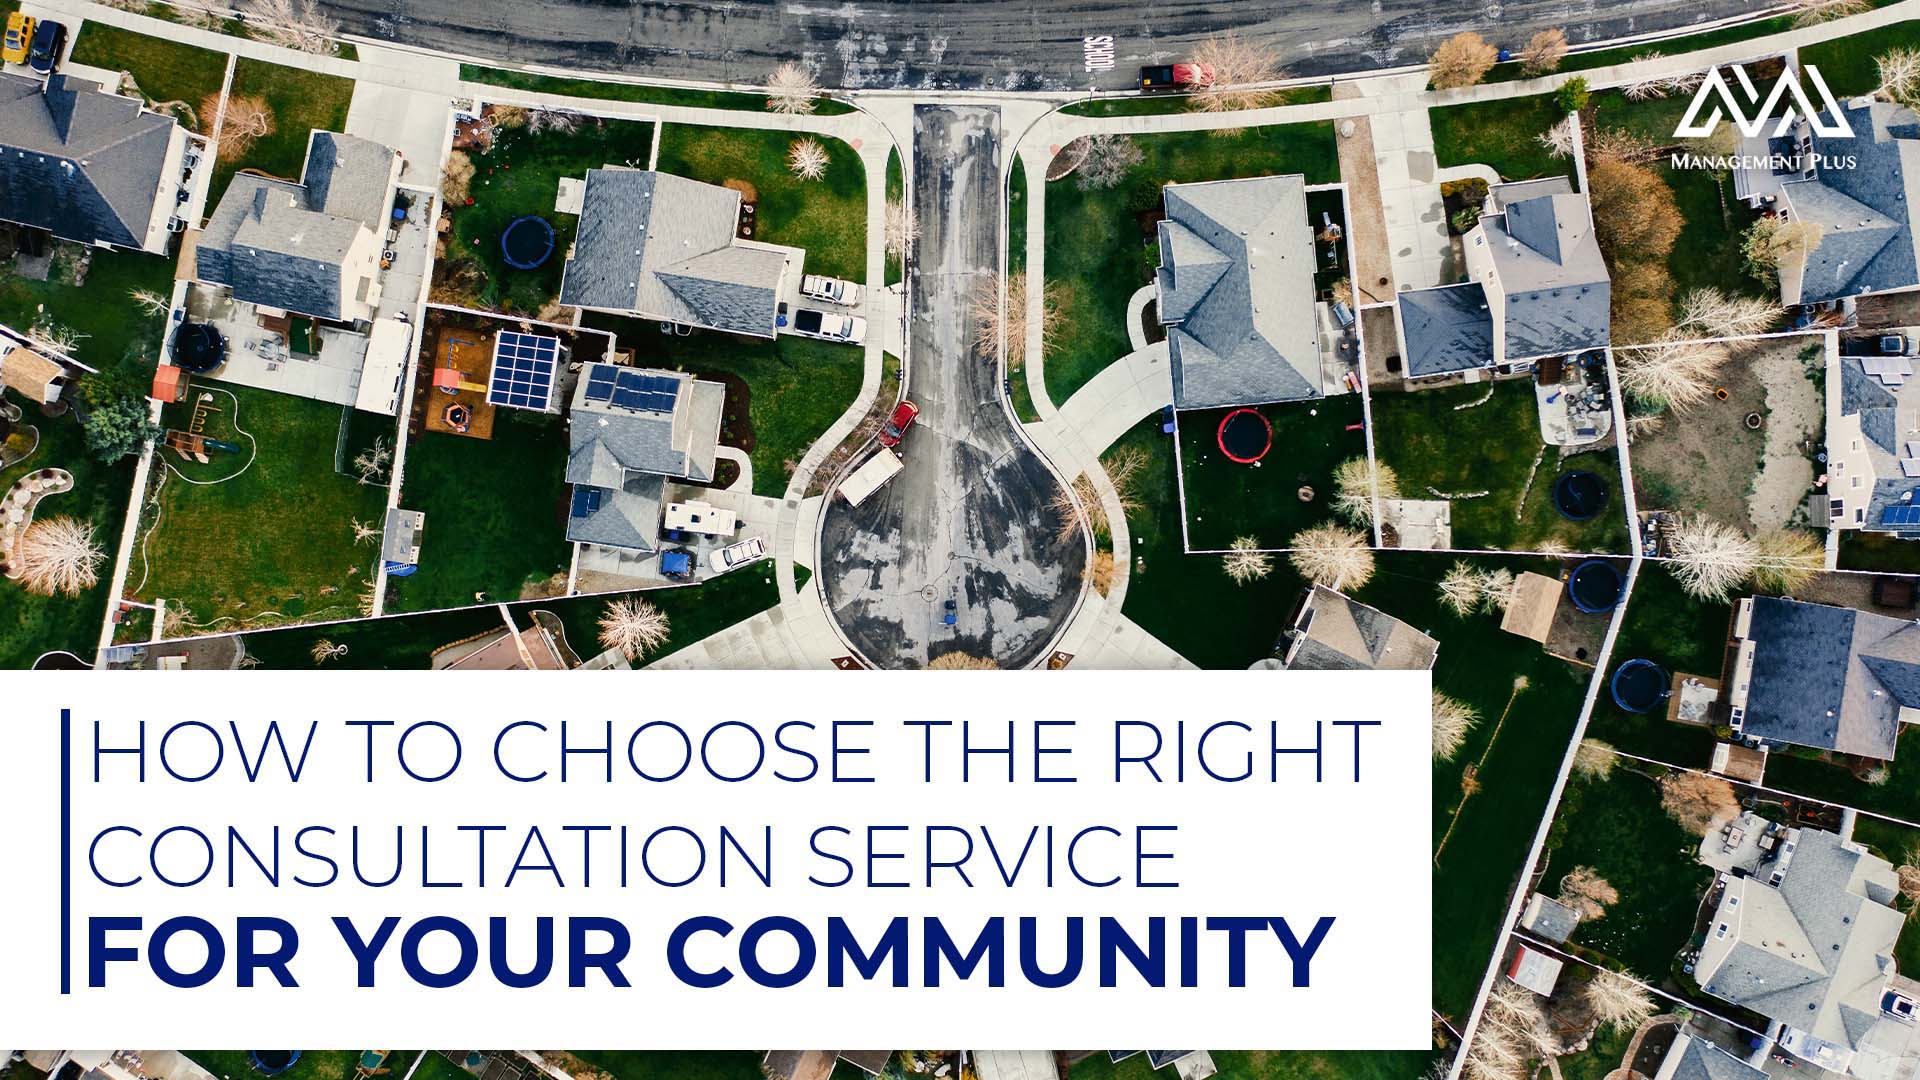 How to Choose the Right Consultation Service for Your Community